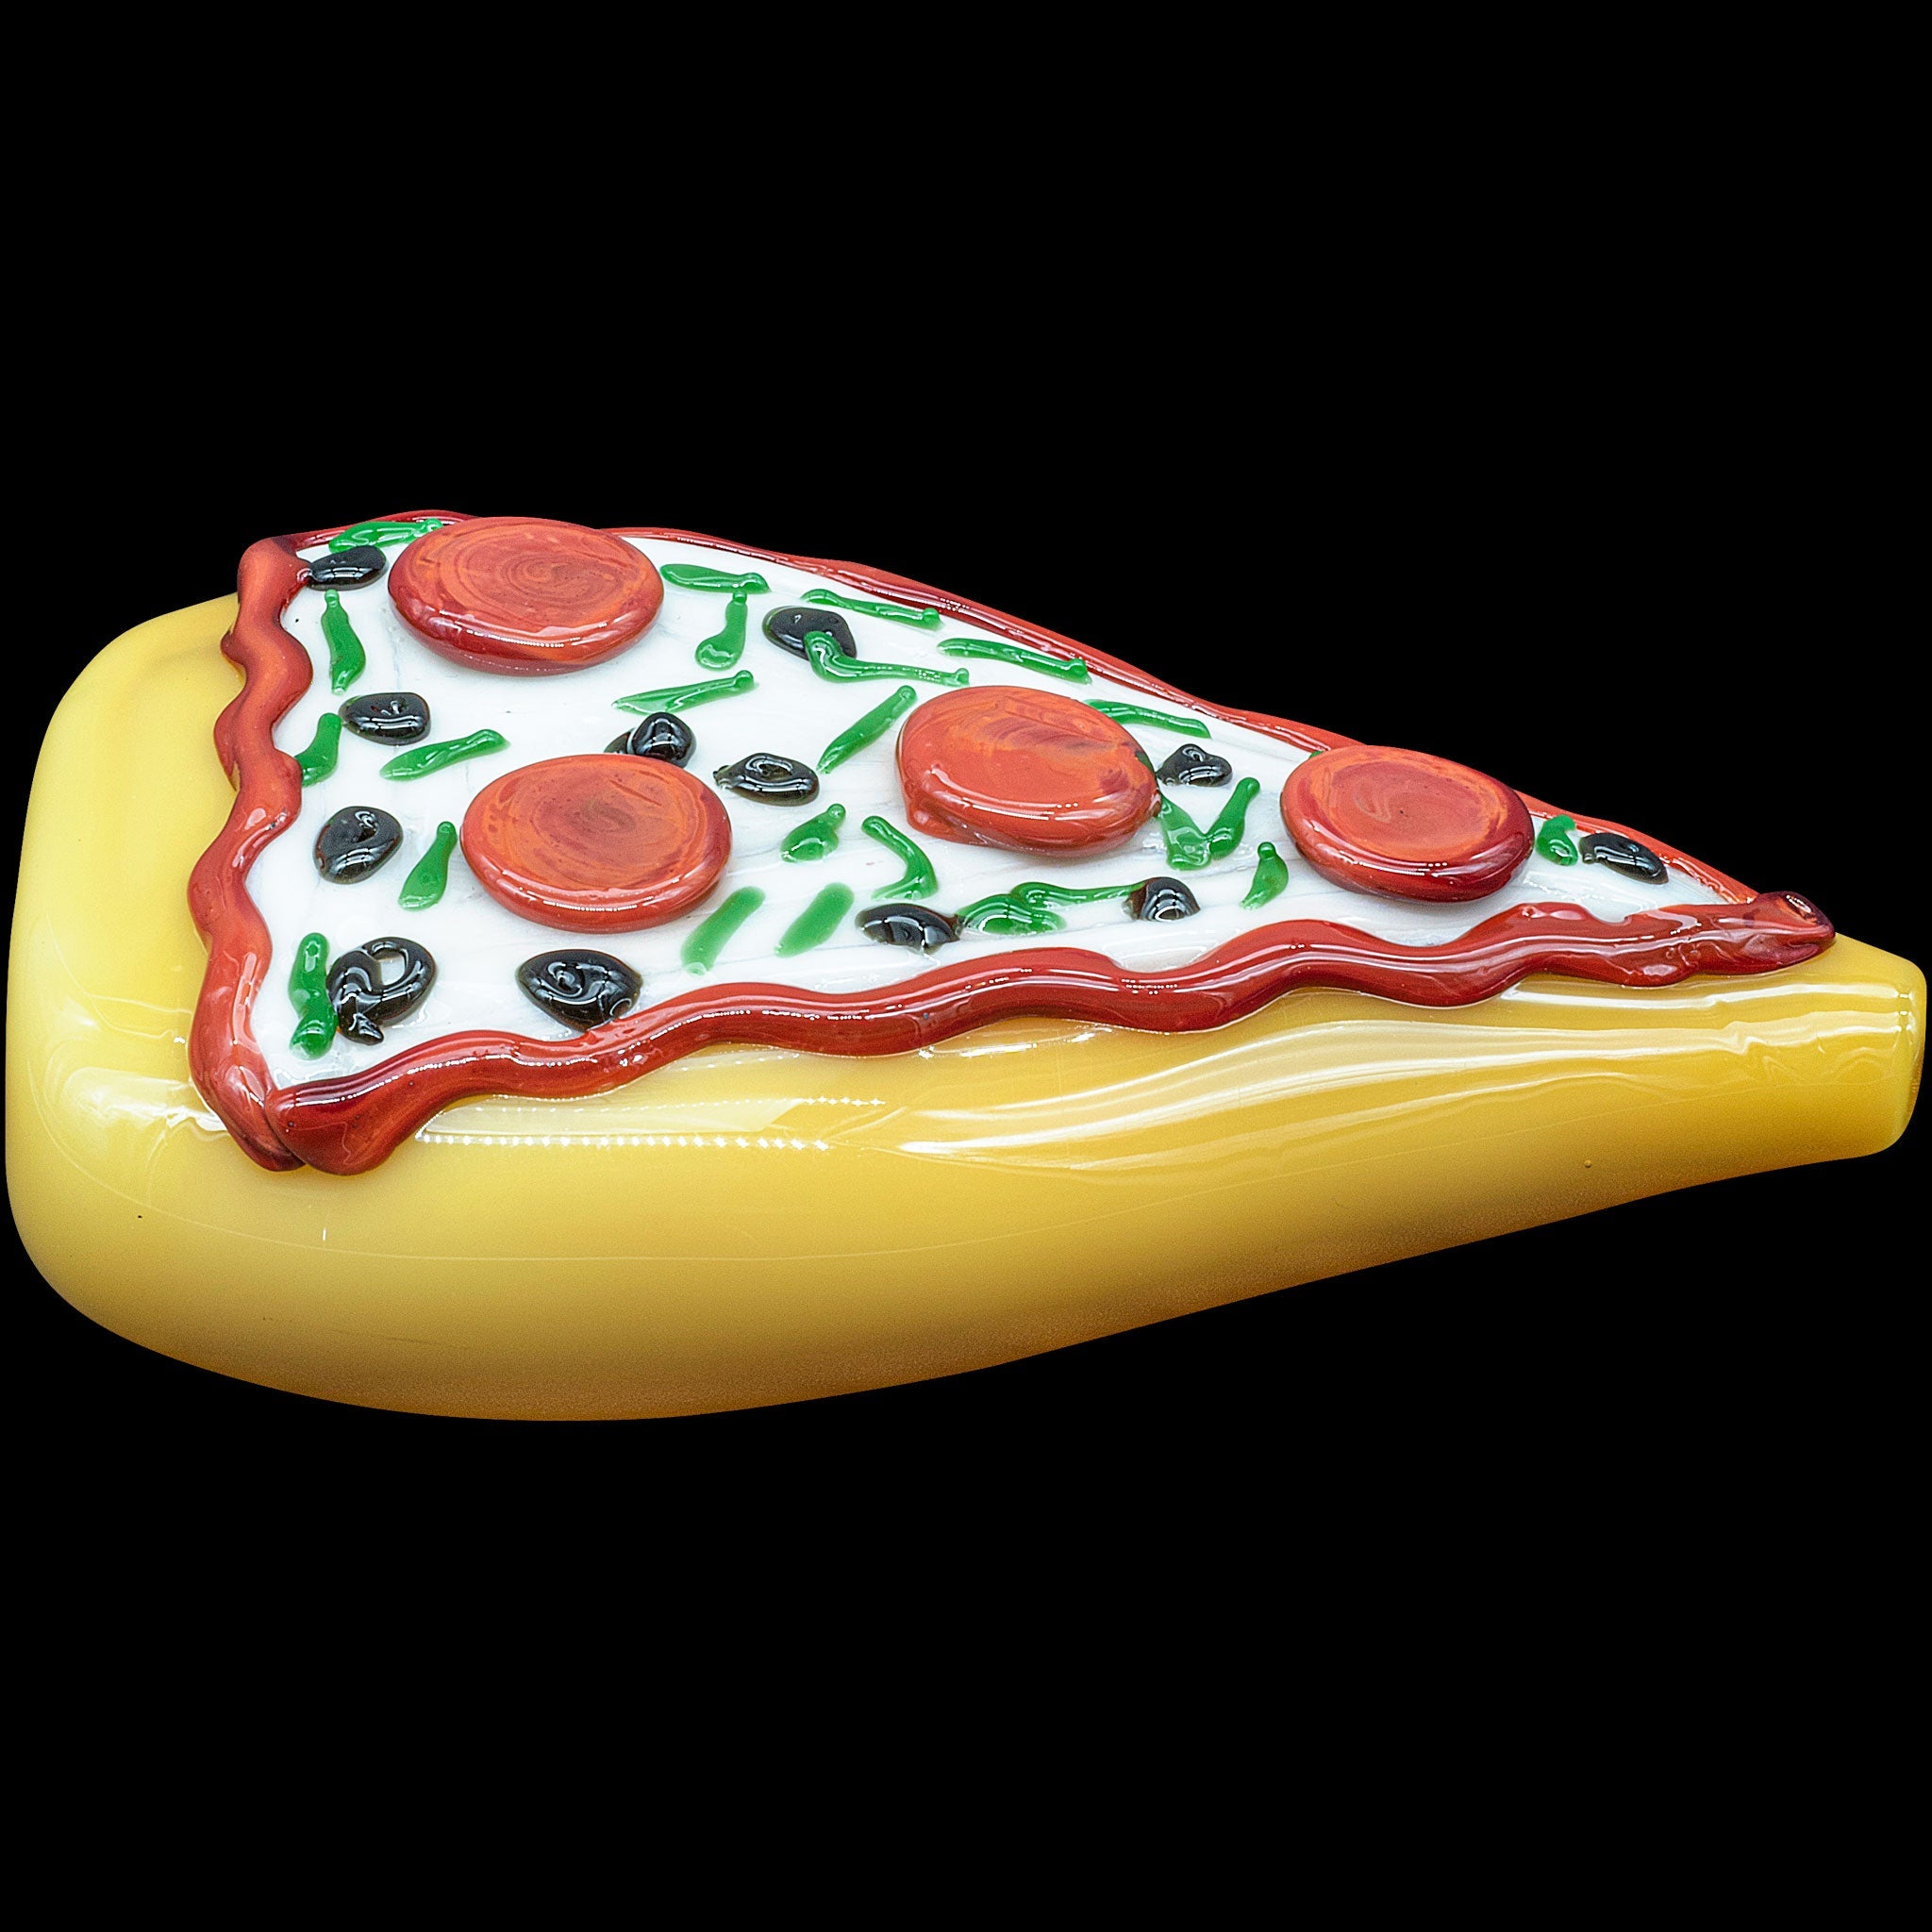 LA Pipes "Pizza Party" Glass Pipe